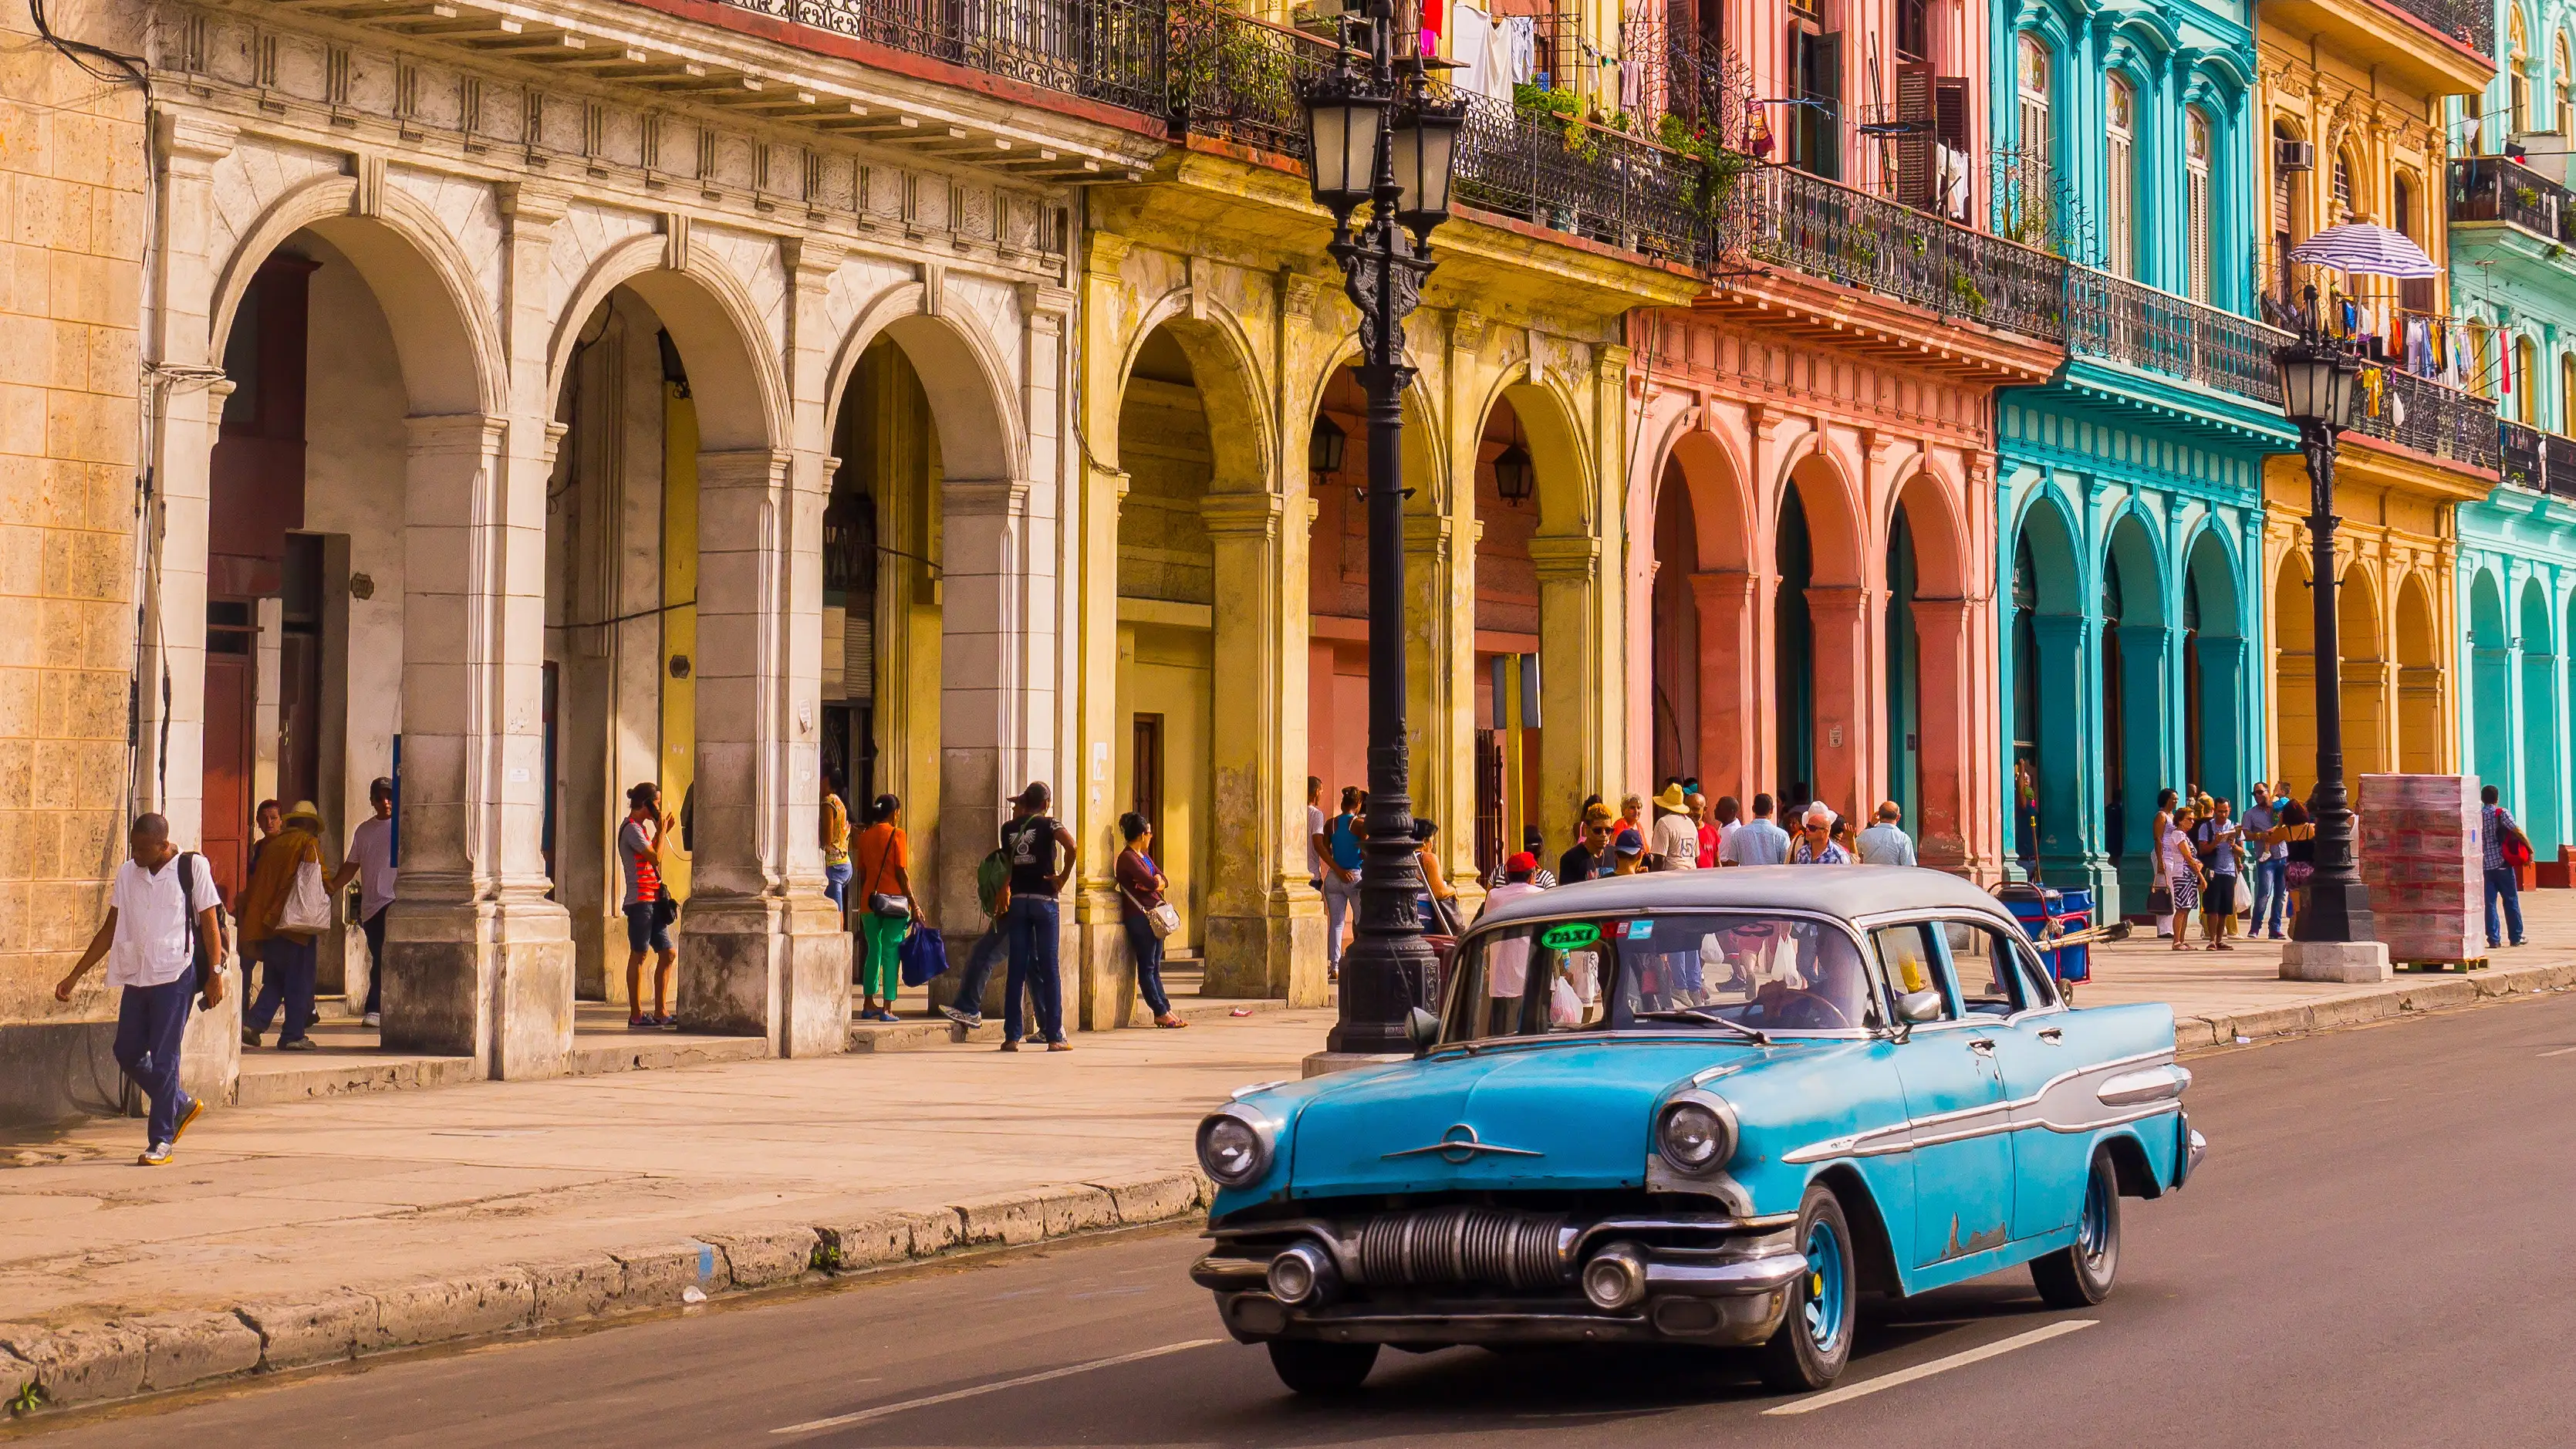 A blue oldtimer taxi is driving through Habana Vieja in front of a colorful façade.